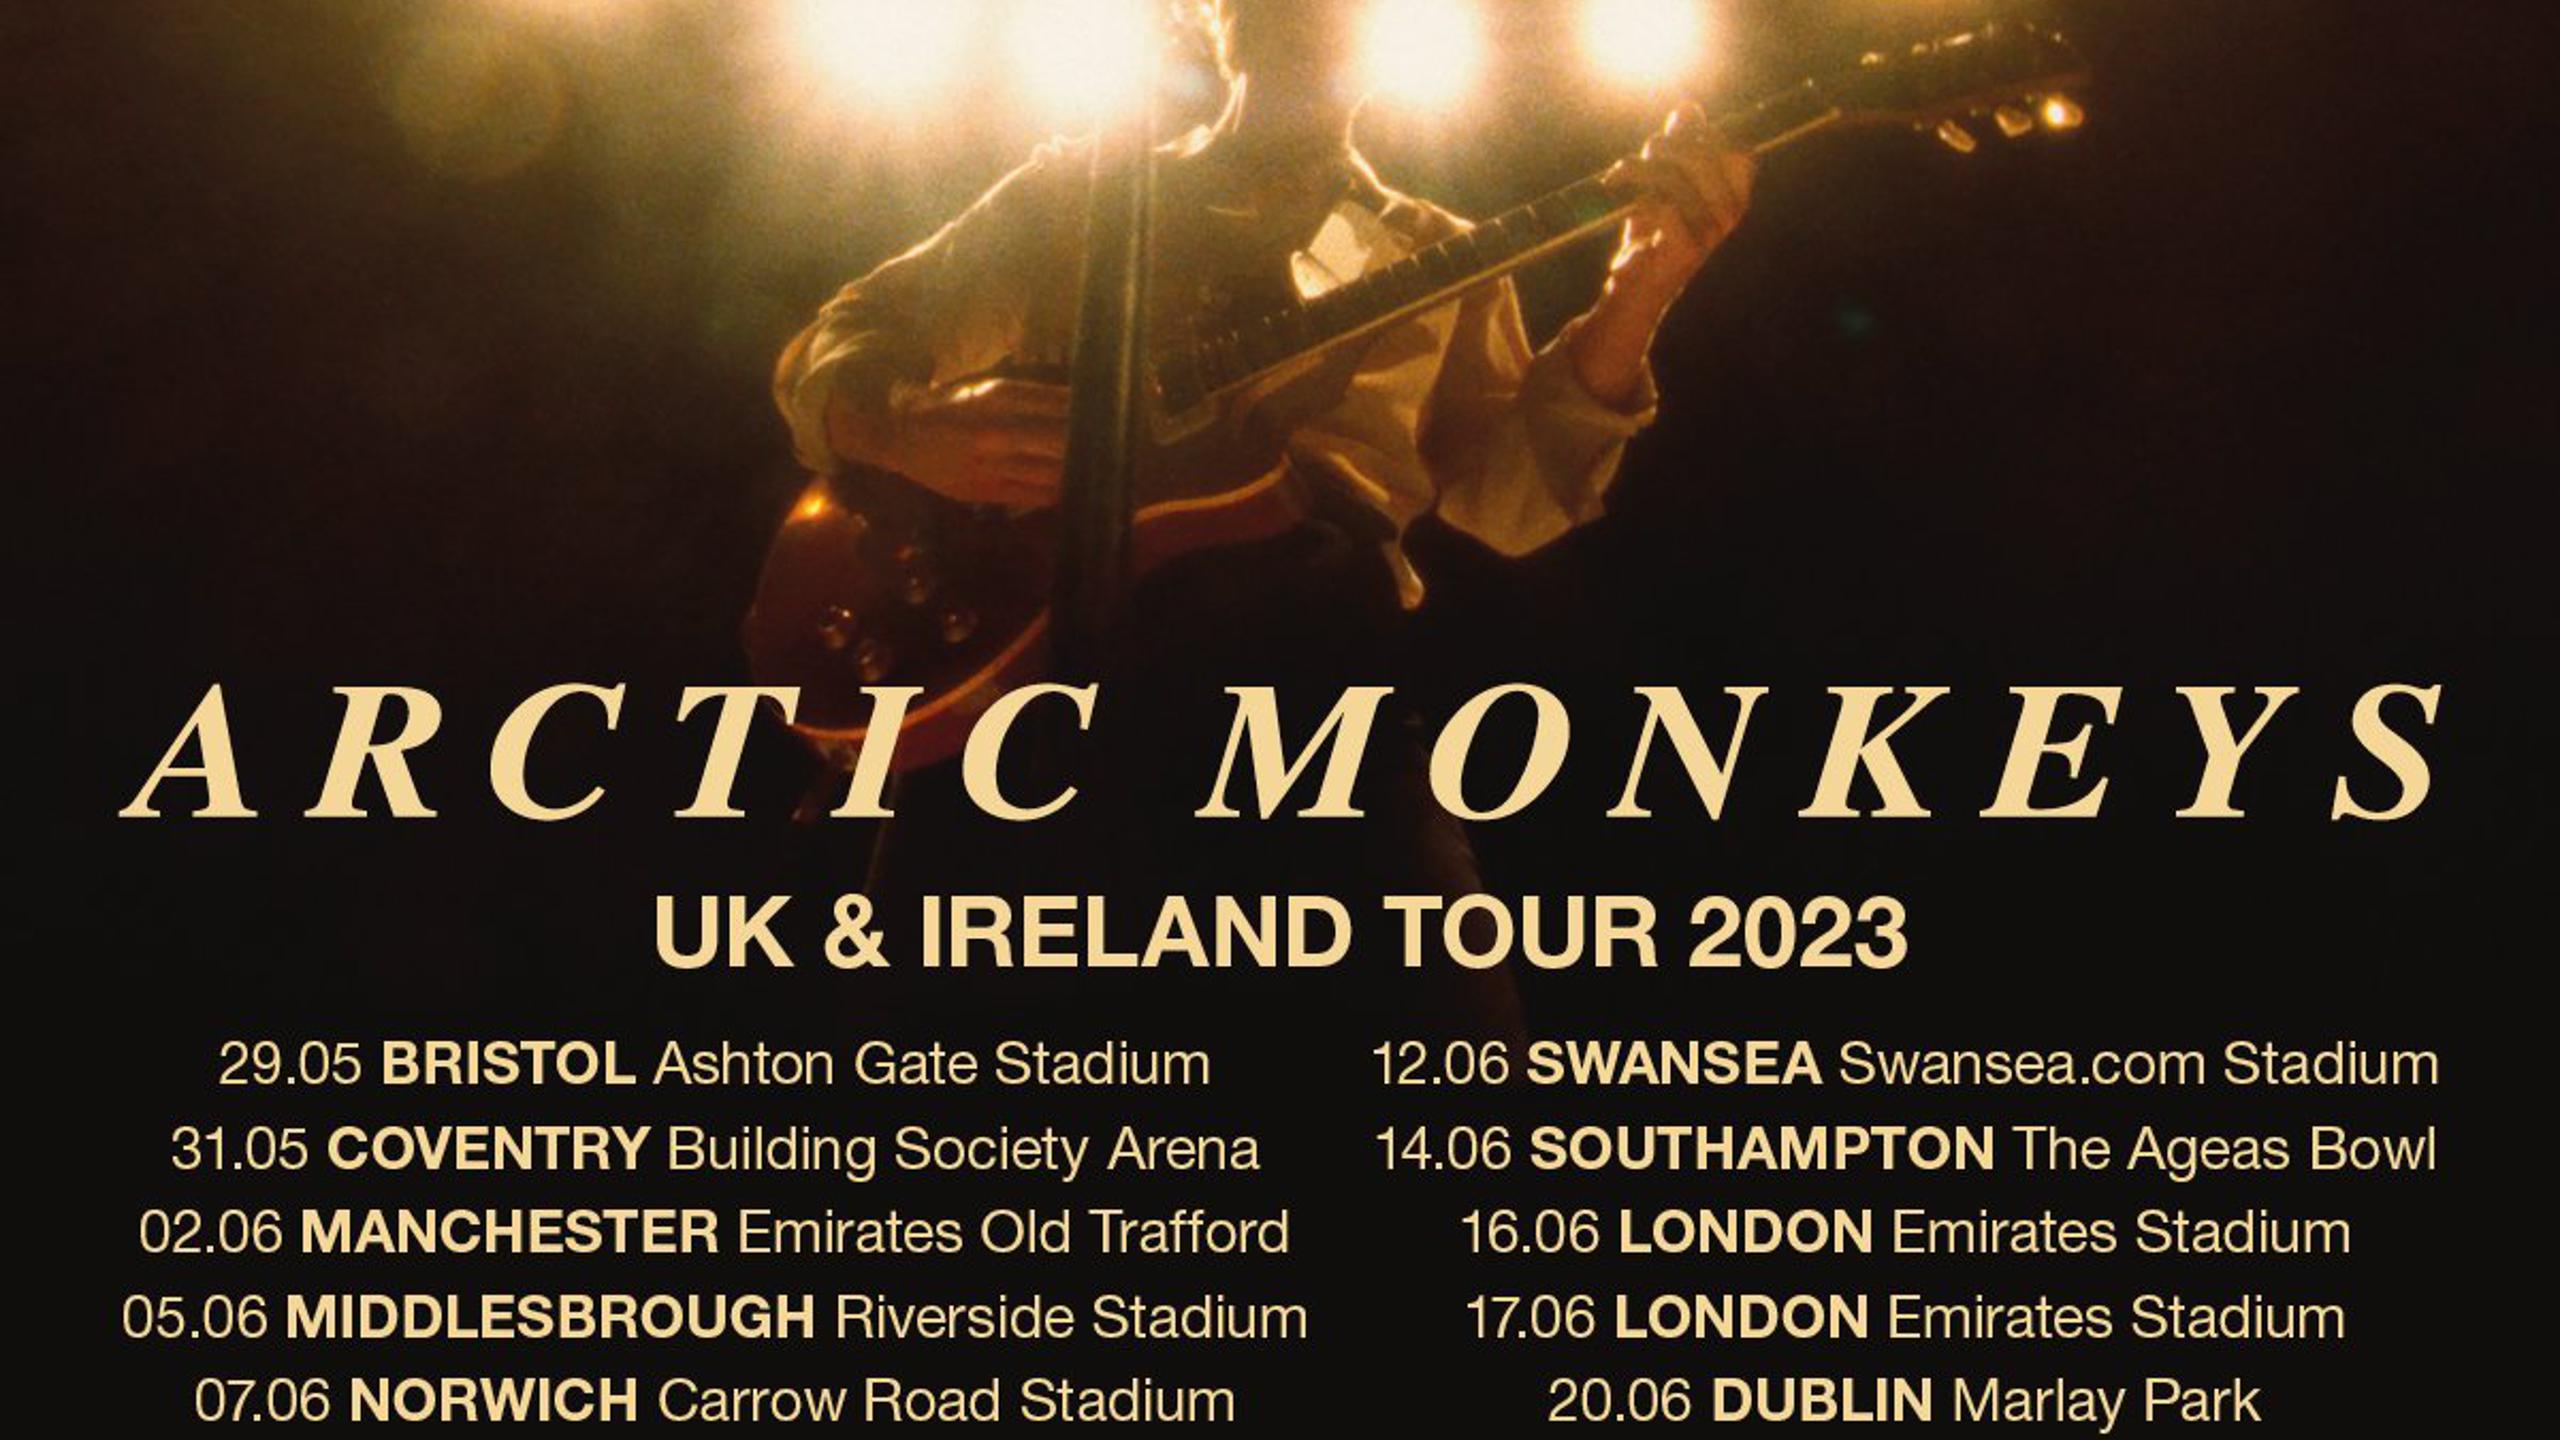 Arctic Monkeys, The Hives, The Mysterines concert tickets for Emirates